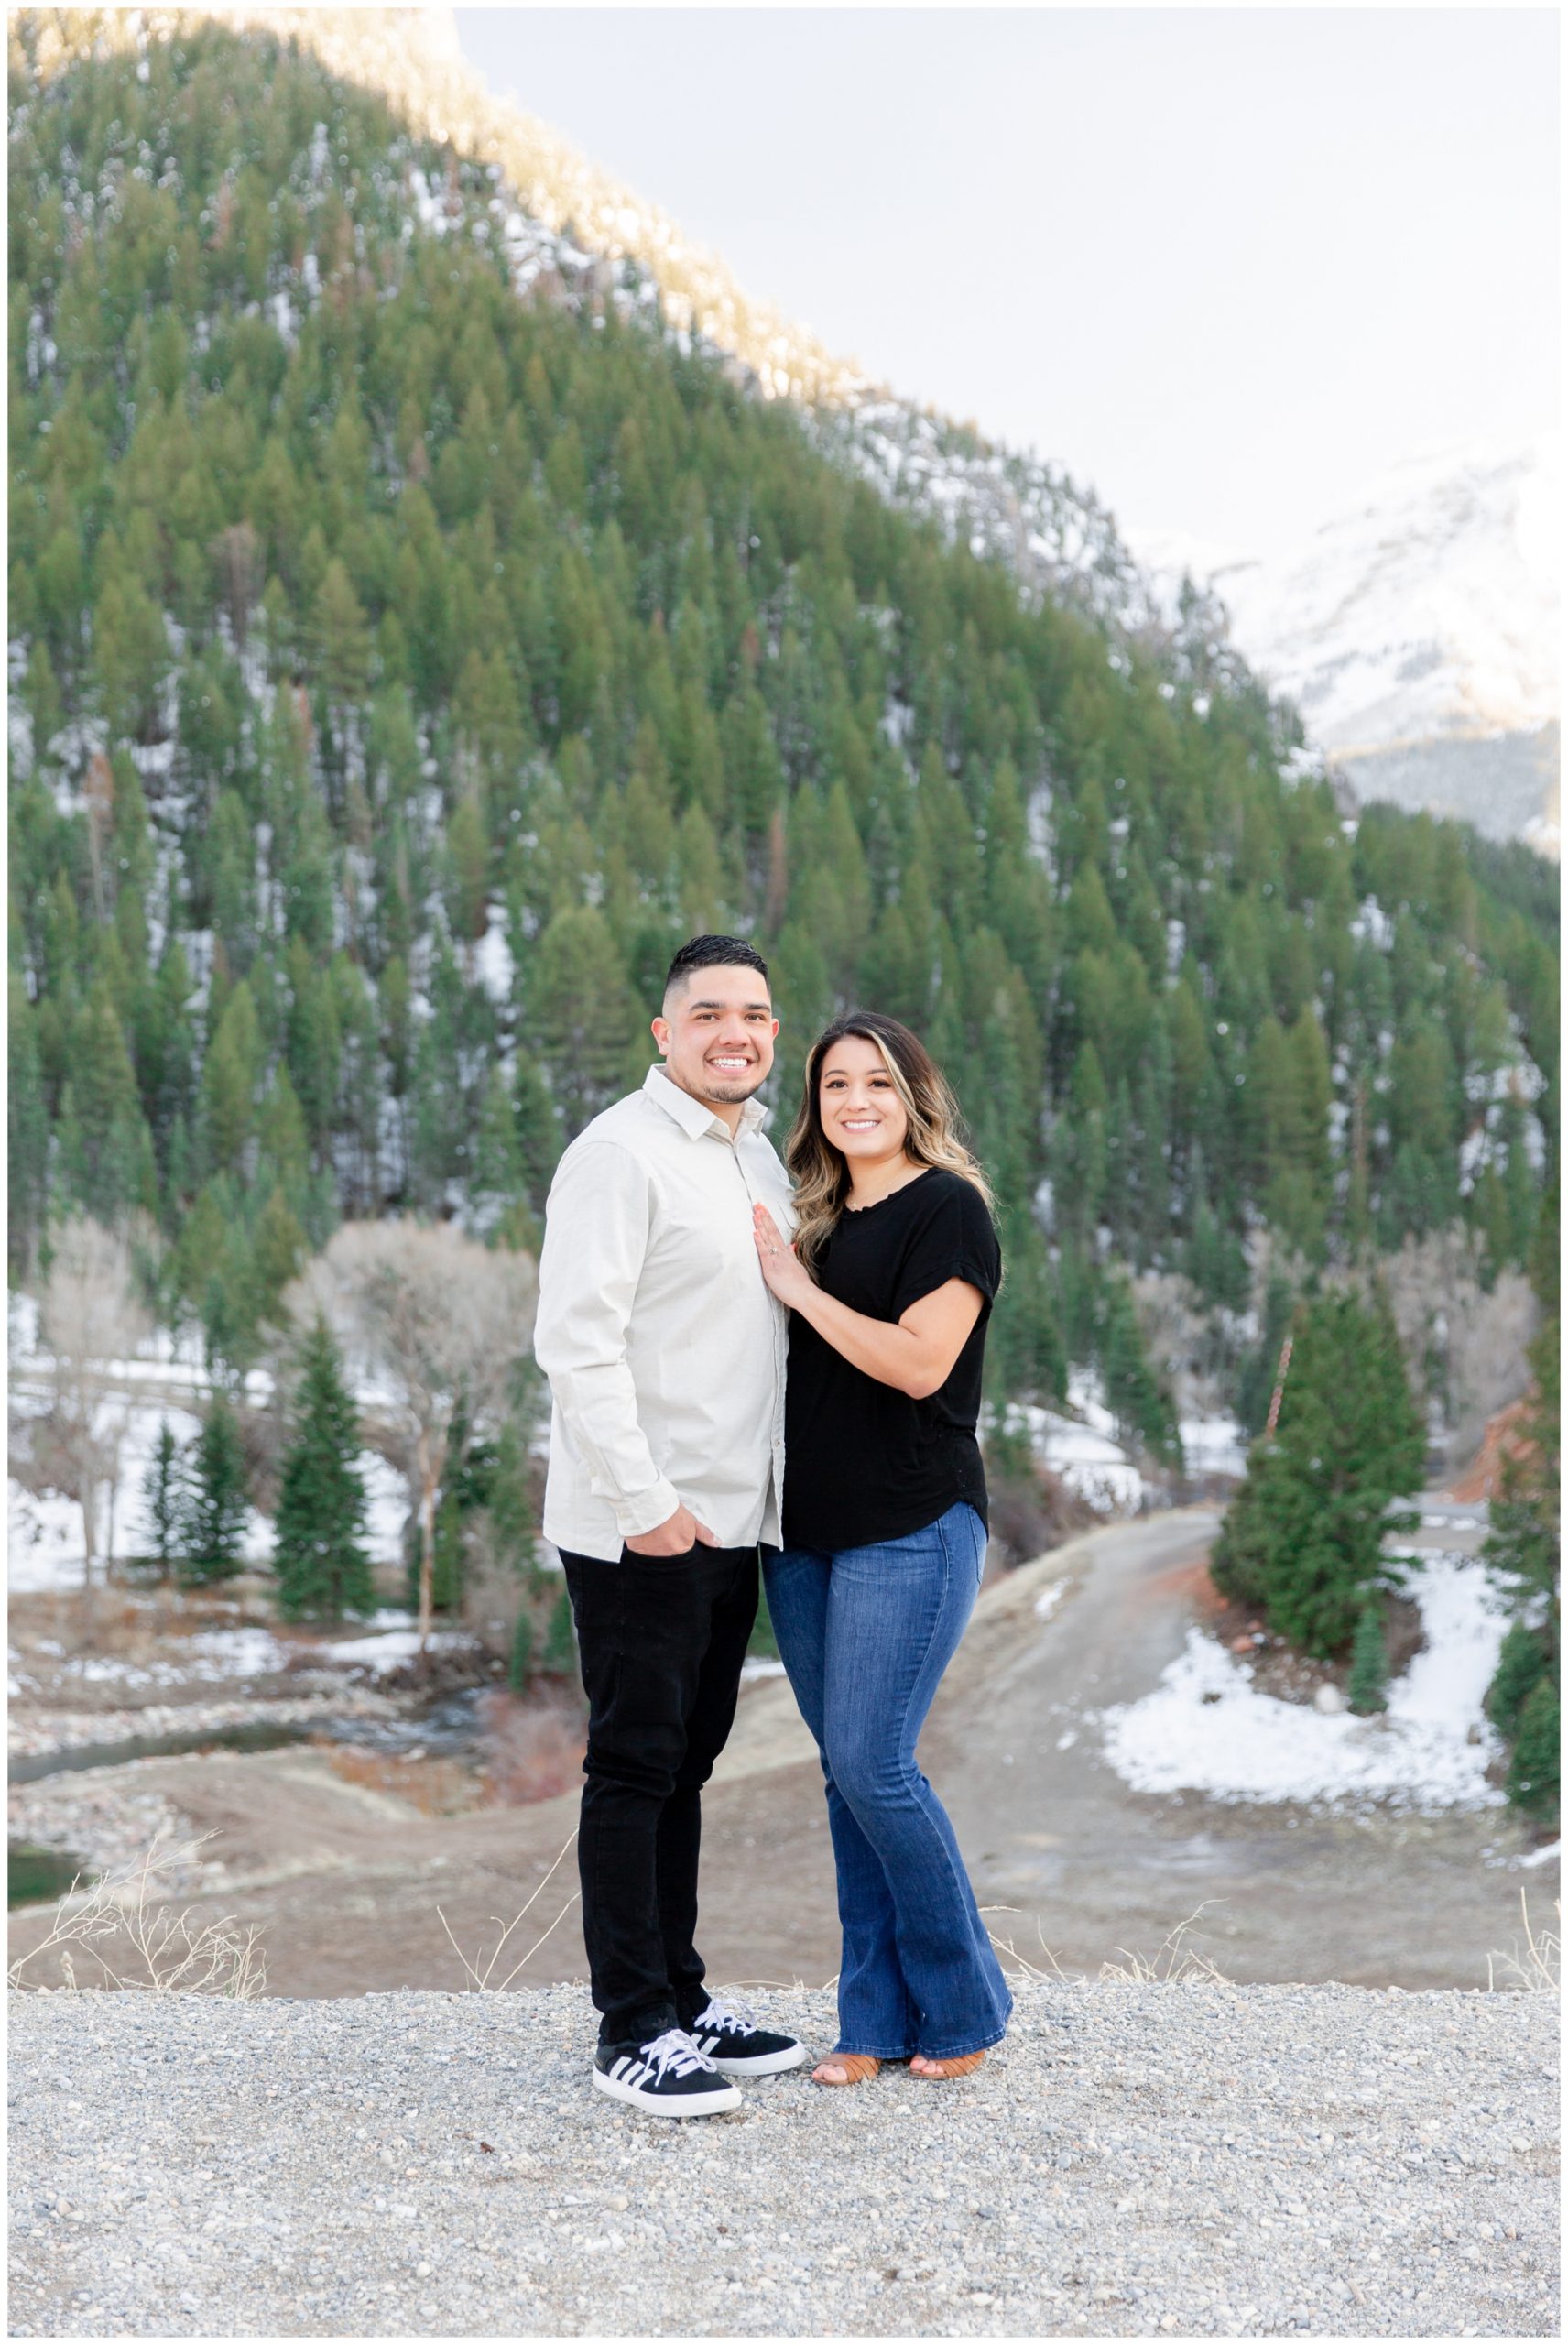 Snowy engagement session in Utah